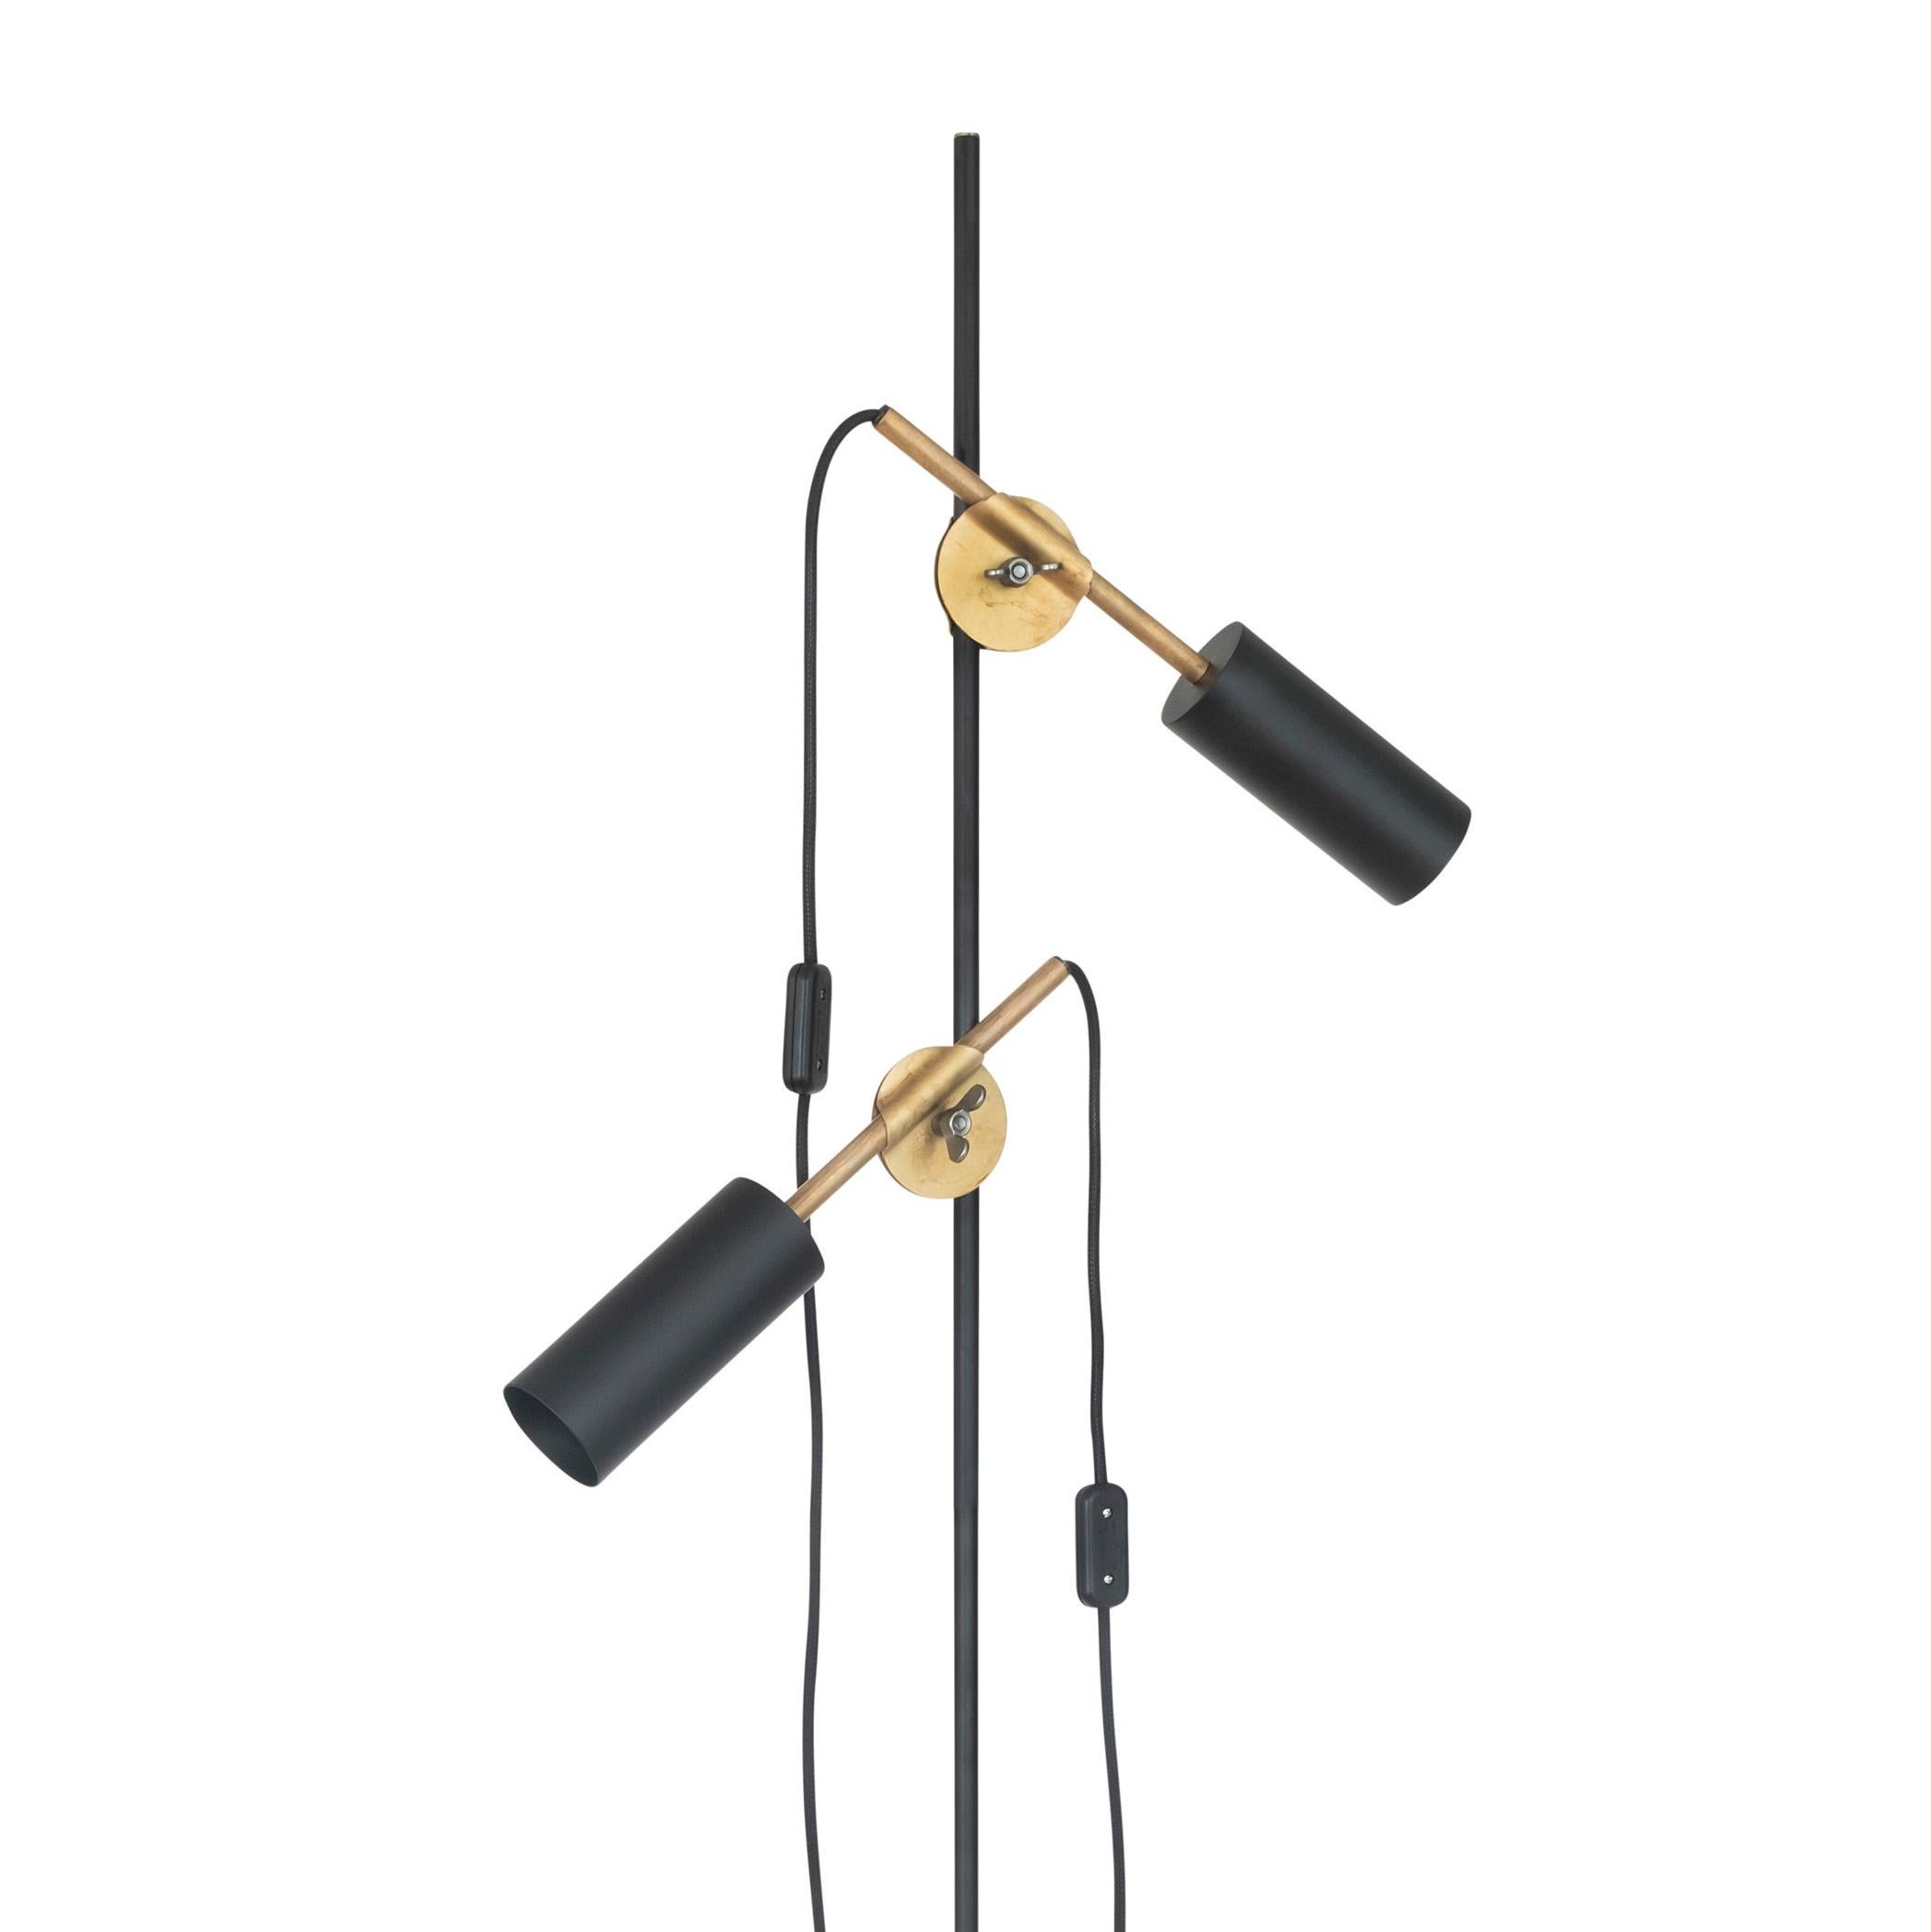 Johan Carpner STAV Two Arms Floor Lamp Black Brass by Konsthantverk and manufactured by Konsthantverk.

The production of lamps, wall lights and floor lamps are manufactured using craftsman’s techniques with the same materials and techniques as the